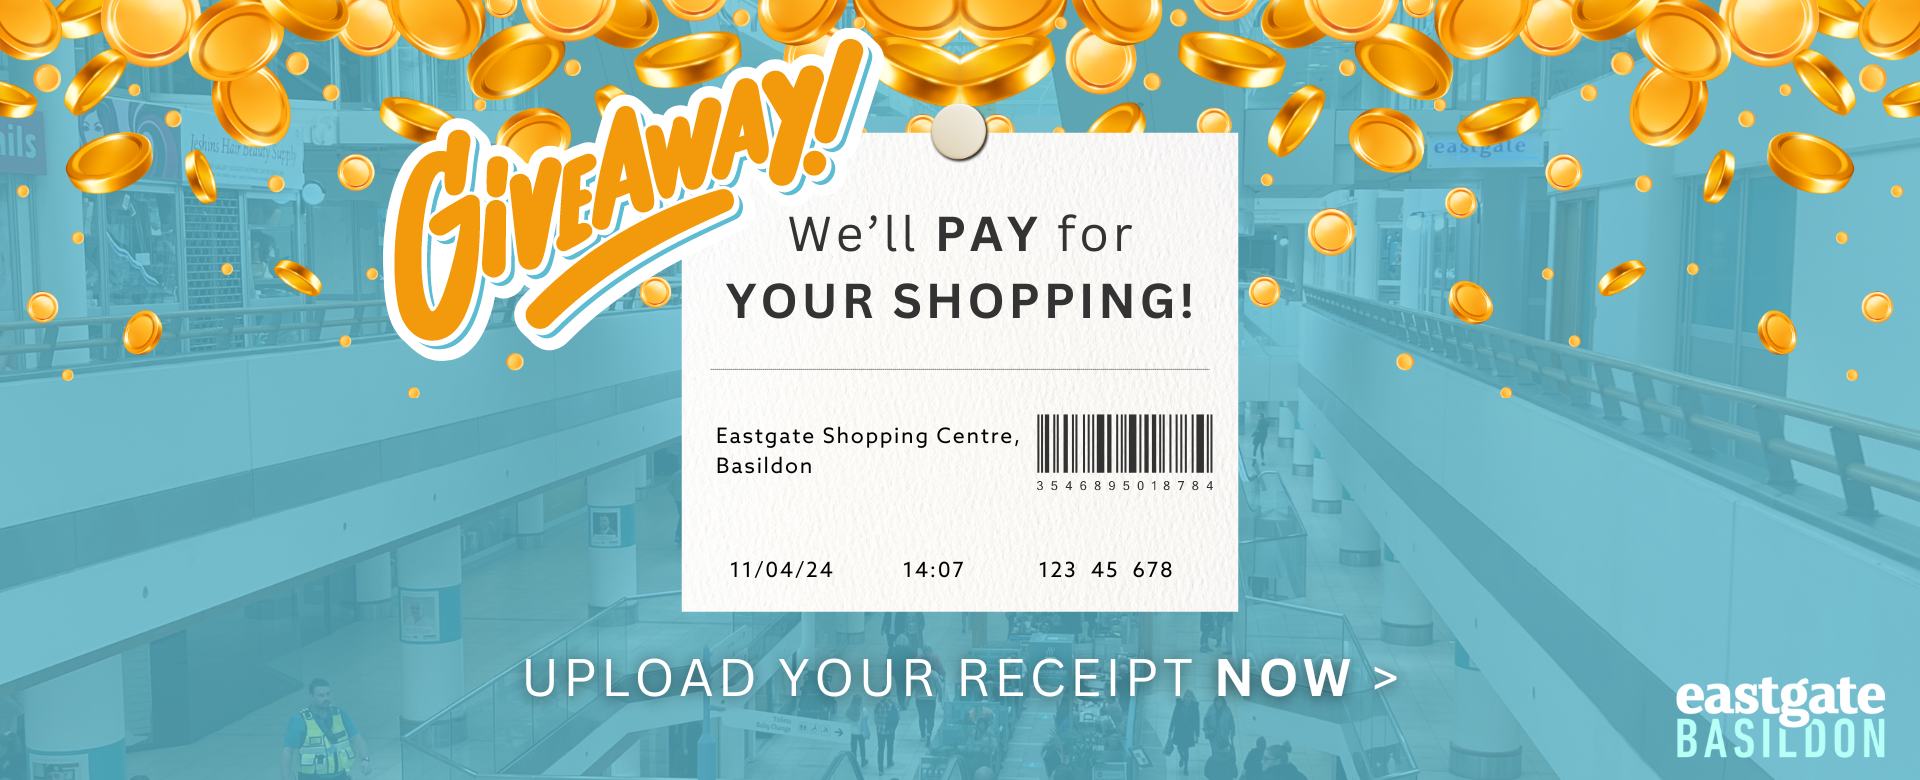 Win Your Shopping Spree with Eastgate! – Shop, Snap, Win!